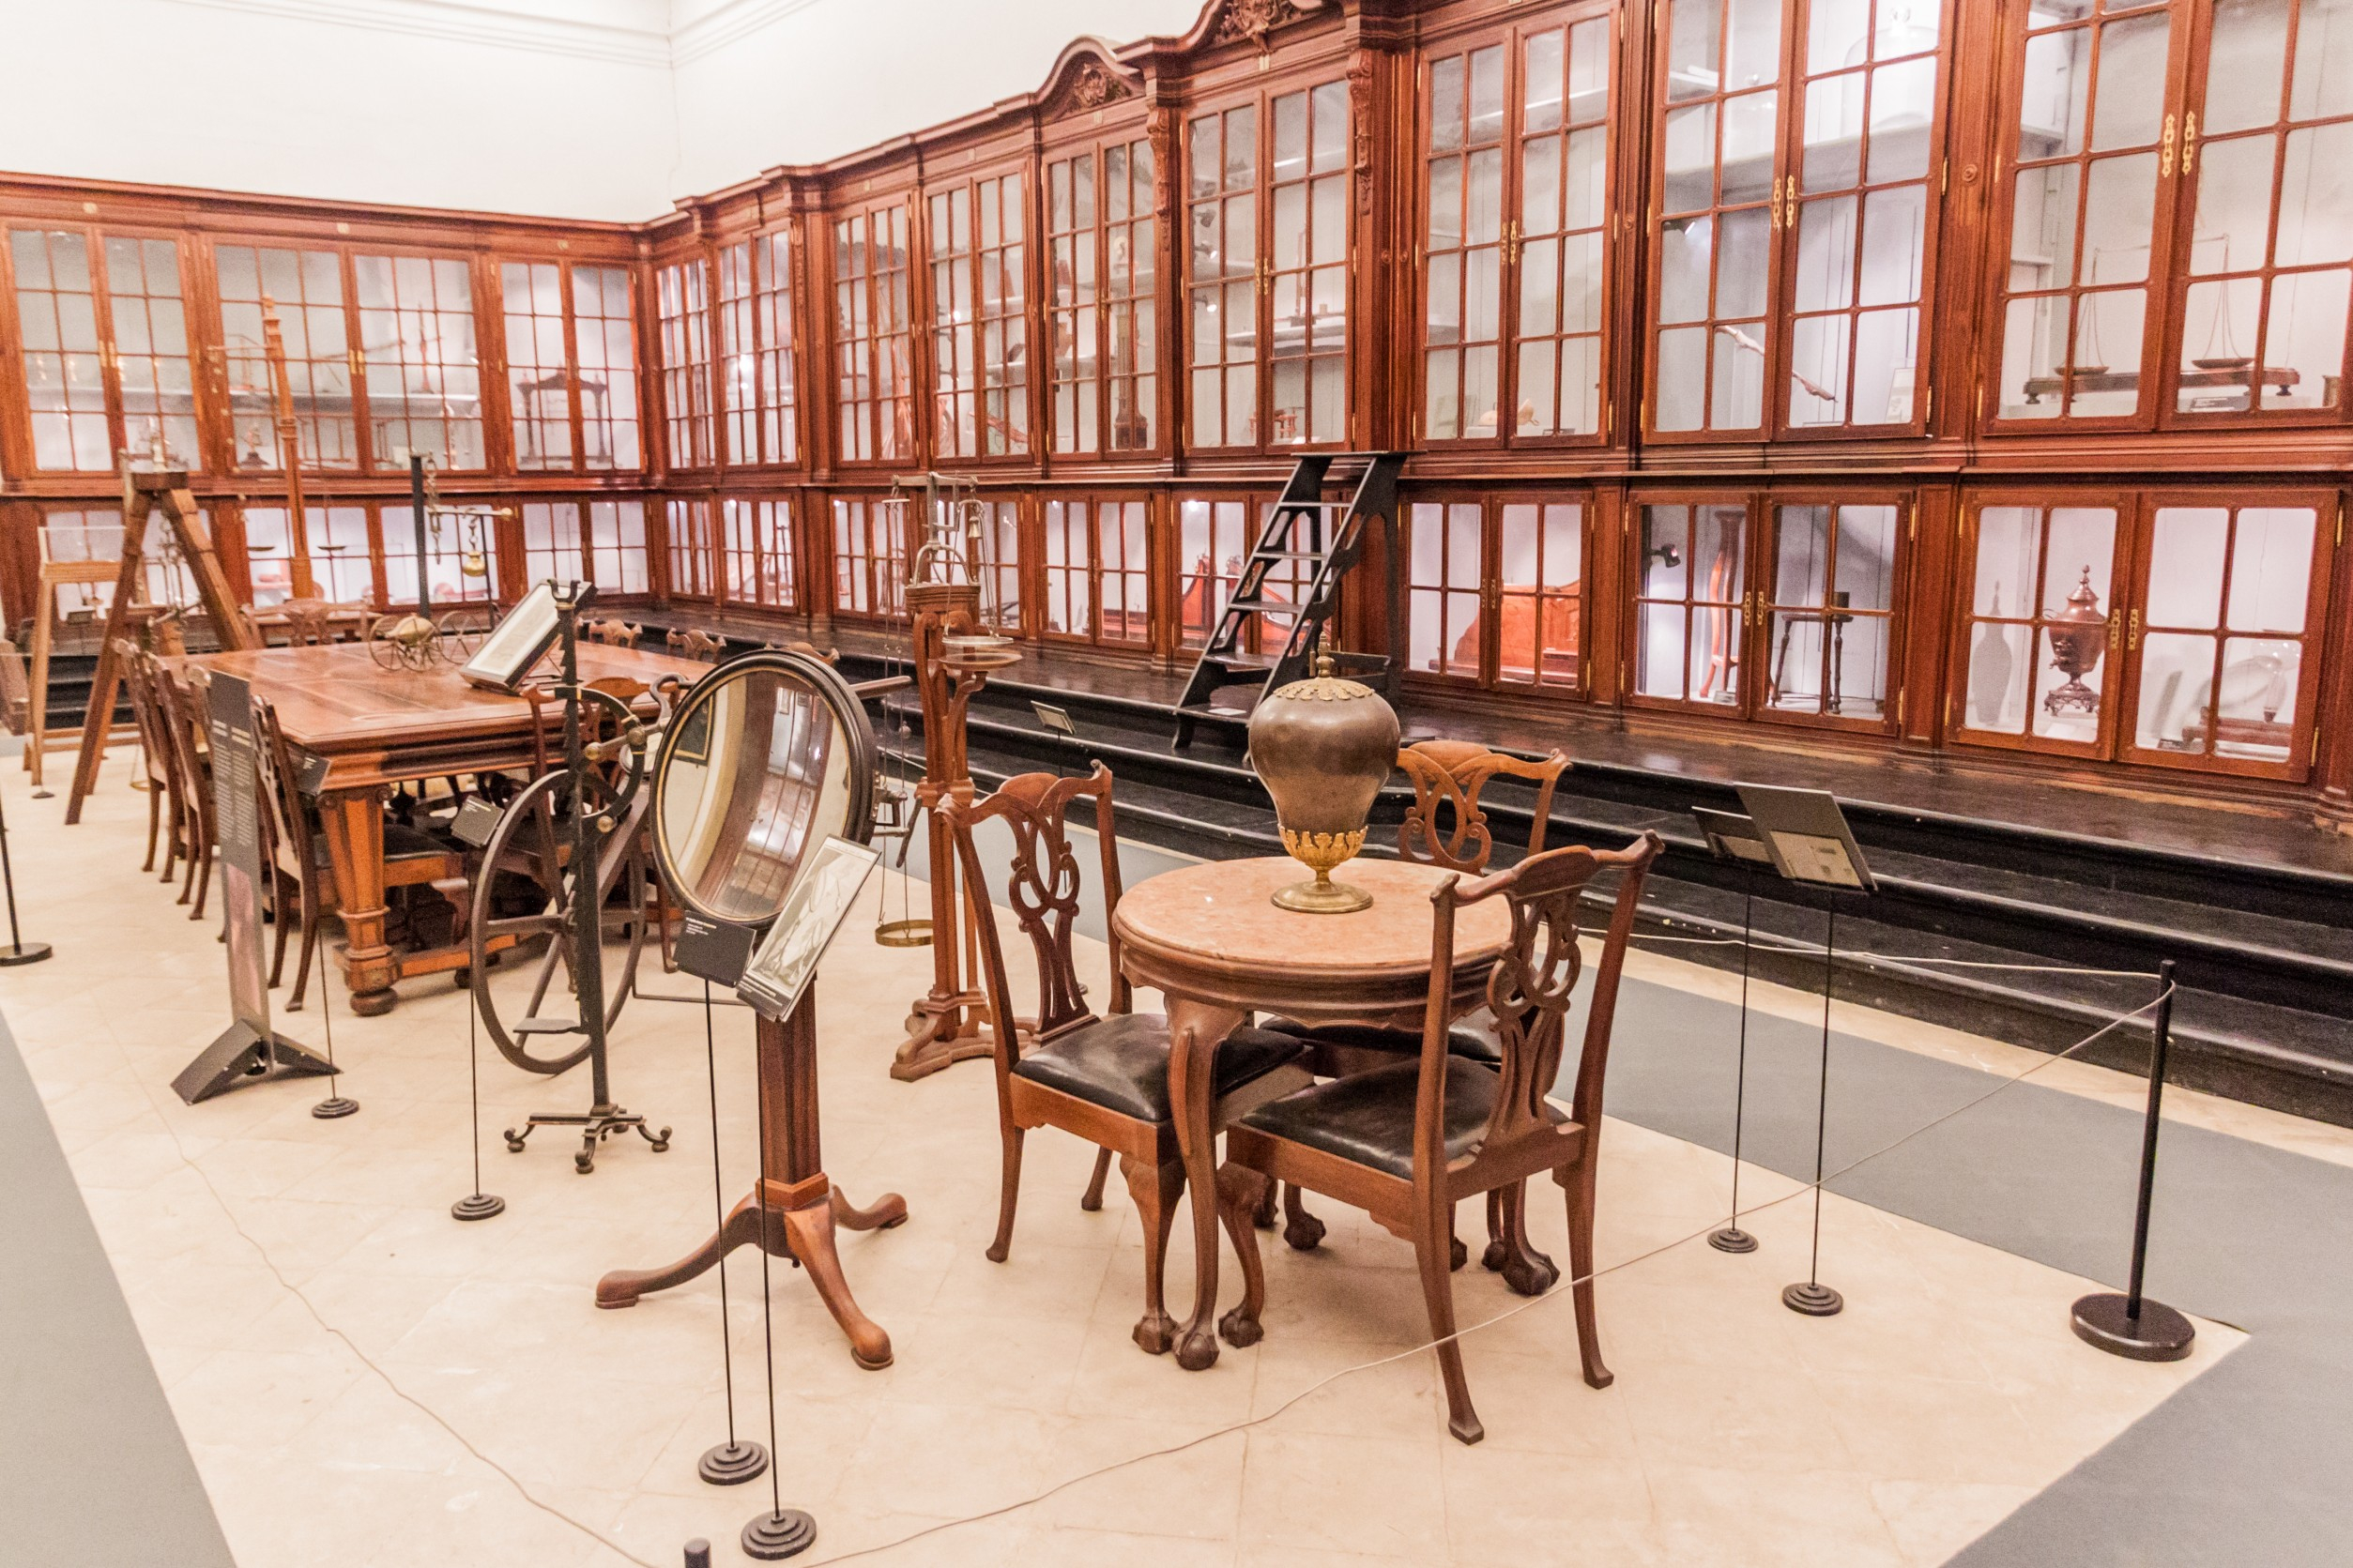 coimbra_room_with_old_scientific_instruments